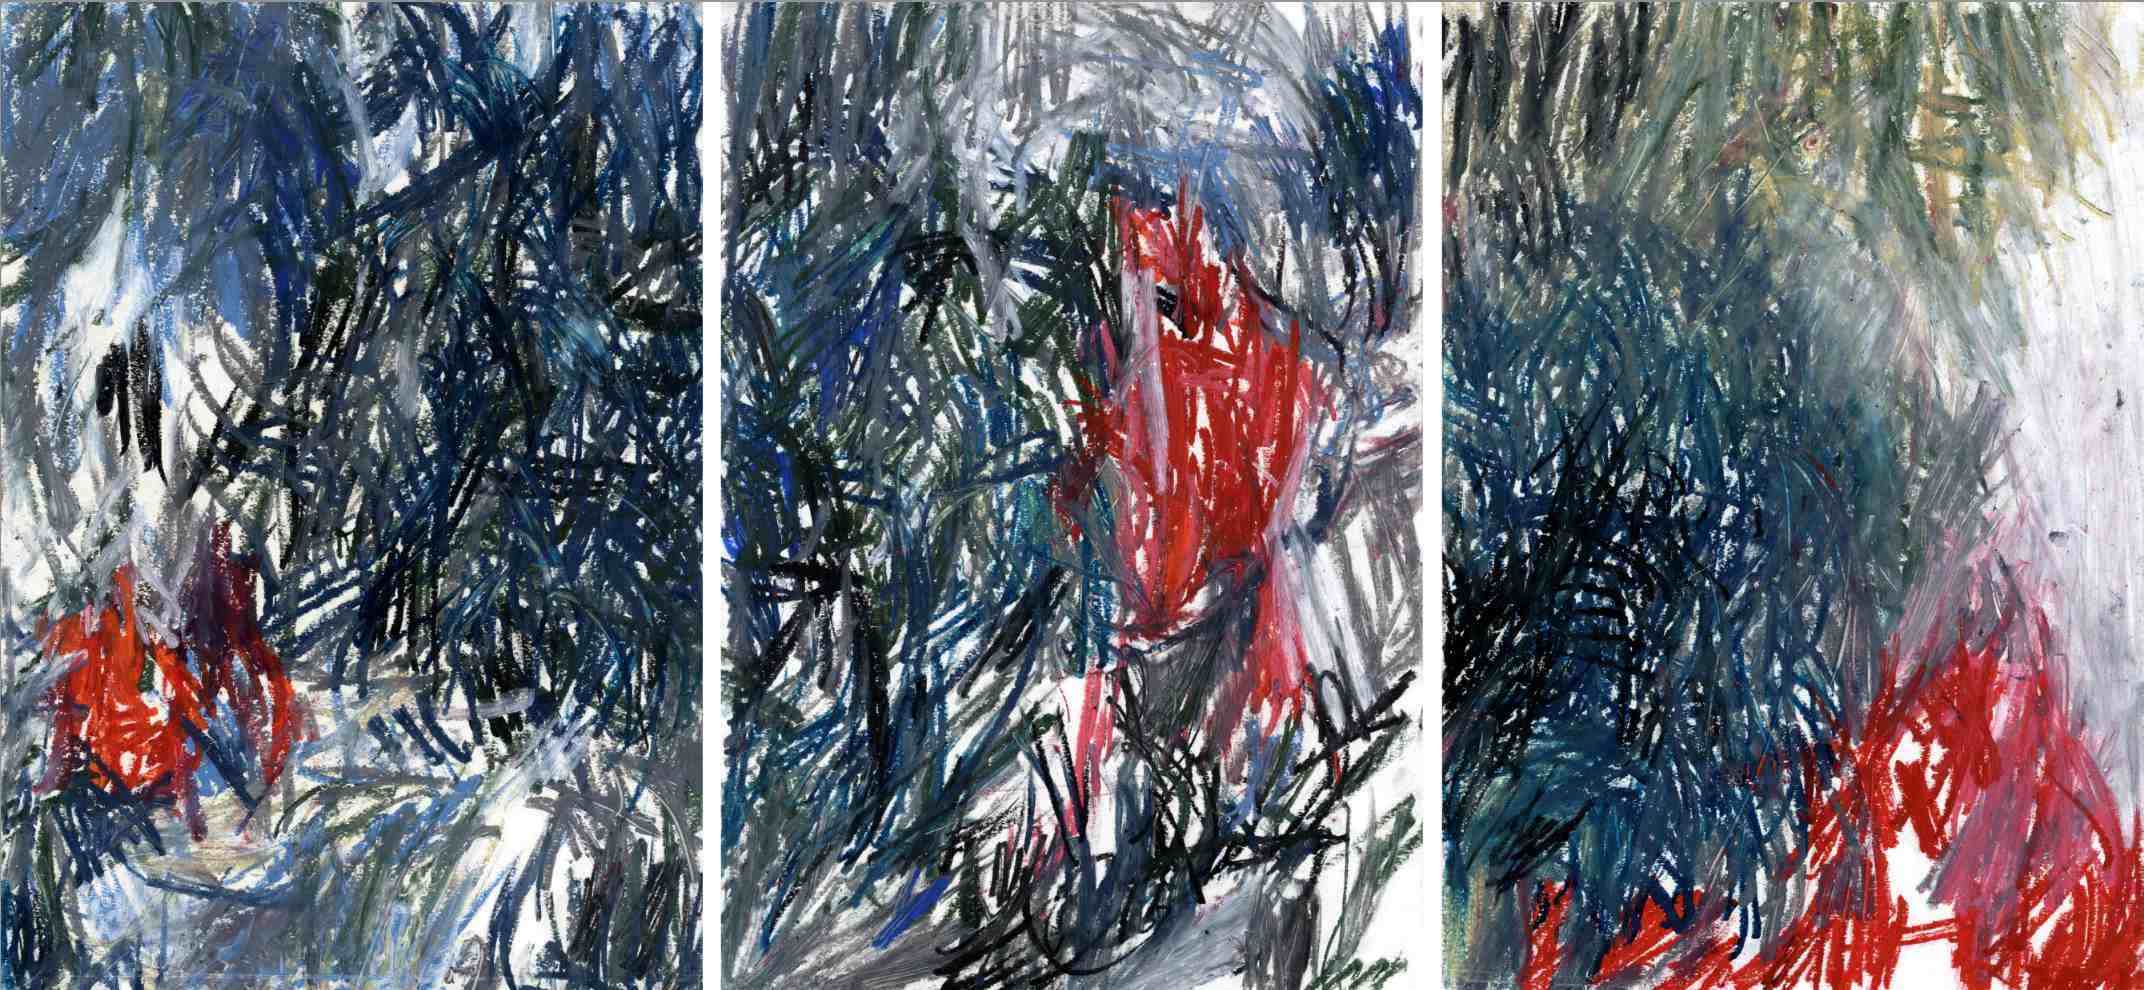   Deep forest , 2011 oil pastels on paper,&nbsp;serie of 3 42 x 29,7 cm each  (Private collection)    